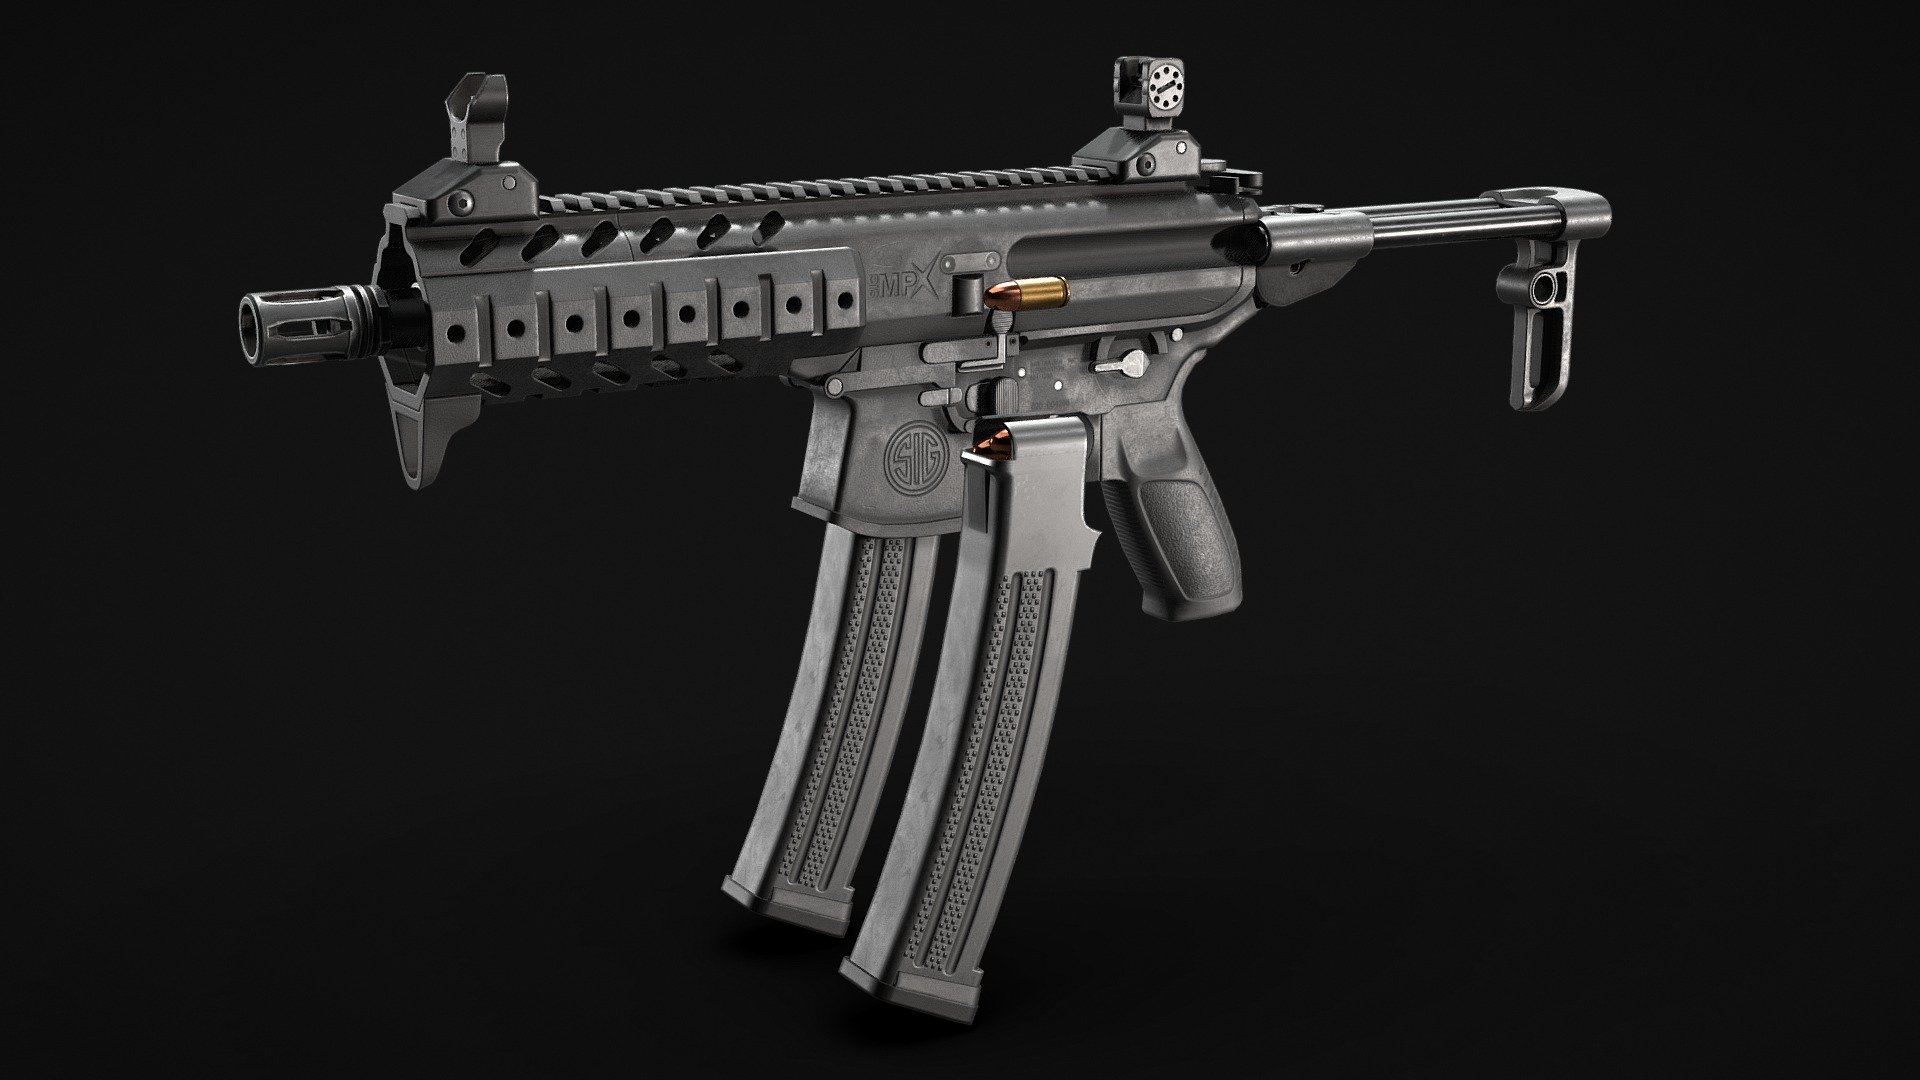 Game ready mesh and textures for the Sig Sauer MPX model for an FPS project.

Textures.

High resolution textures(4k) exported out of Substance Painter for Unreal Engine 4 and Unity. And also there is a main textures packs(Base Color, Height, Metallic, Mixed AO, Normal, Normal DirectX and Roughness maps) - just in case.

Meshes.

All meshes were exported in fbx. and obj. formats.

Substance Painter.
There is an .spp file with only mesh and all the baked maps.

Polycount:

Gun: 16 000 faces (~28 000 tris) 

Magazine: 624 faces (~ 1100 tris) 

Bullet: 280 faces (~ 500 tris)

! Attention this 3D model is not 3D printable. !

Questions.

If you have any questions - contact me at disu.post@gmail.com - Sig Sauer MPX (Retexture) - 3D model by di_su 3d model